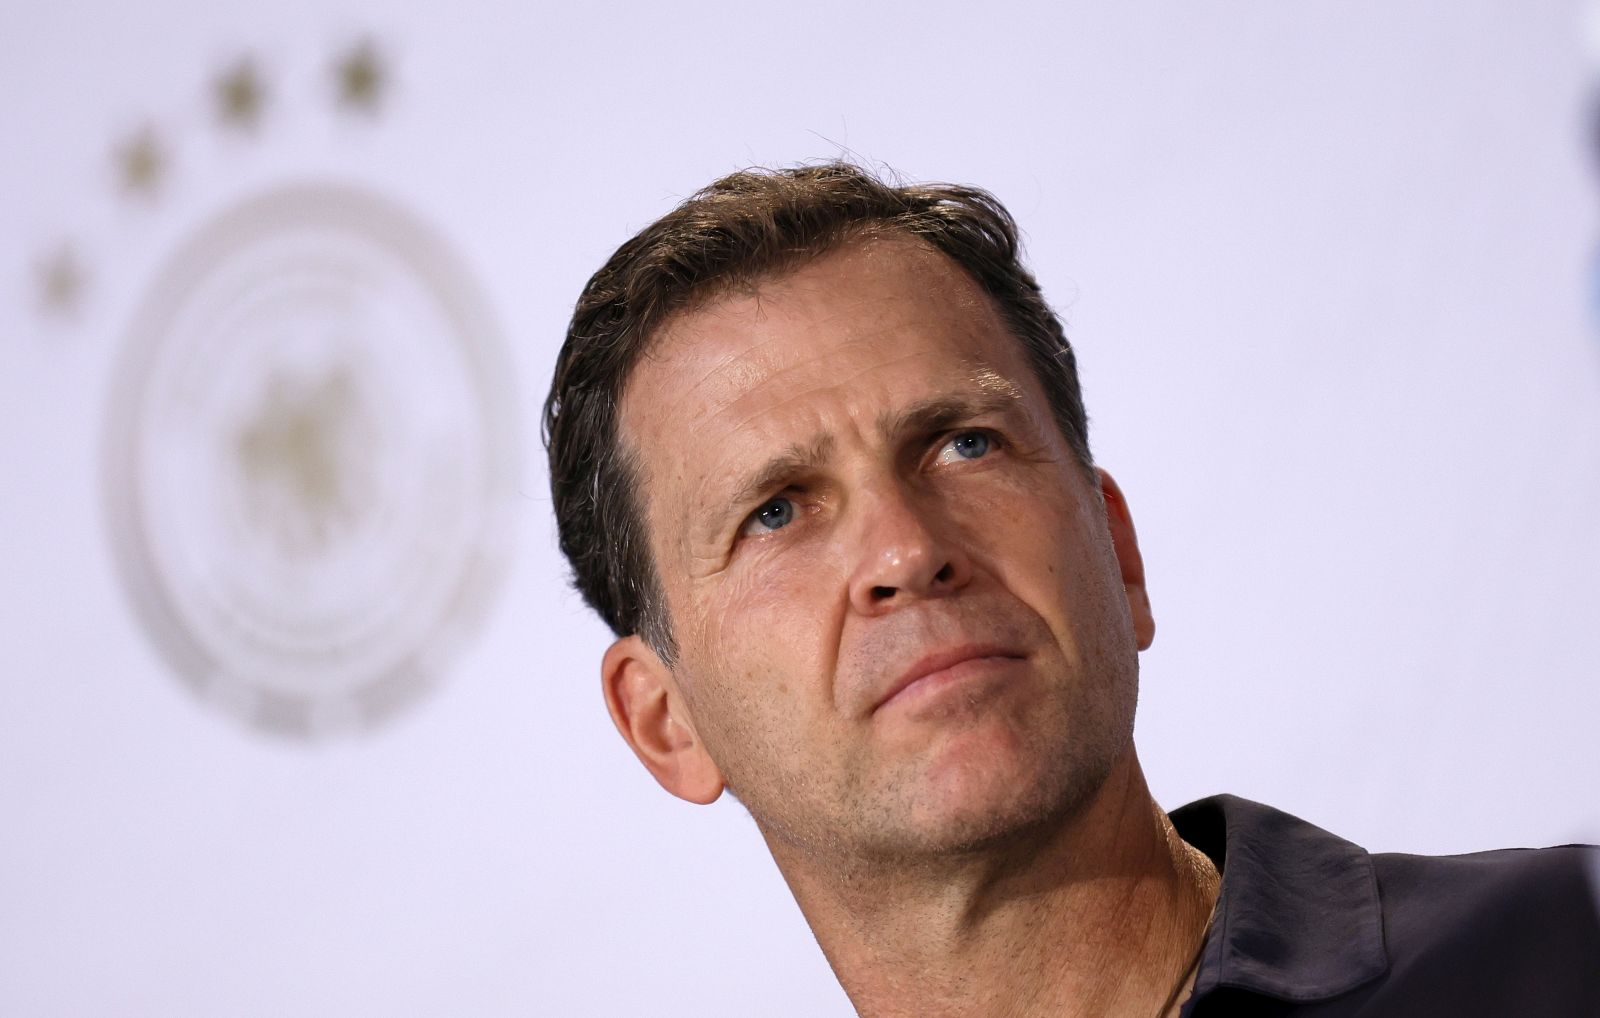 epa10350848 (FILE) - Germany's soccer team manager Oliver Bierhoff during a press conference in Al Ruwais, Qatar, 19 November 2022. Germany is preparing for the FIFA World Cup 2022 in Qatar with their first match against Japan set for 23 November (re-issued 05 December 2022). Bierhoff and the German football federation (DFB) agreed to terminate Bierhoff's contract it was announced 05 December 2022.  EPA/RONALD WITTEK